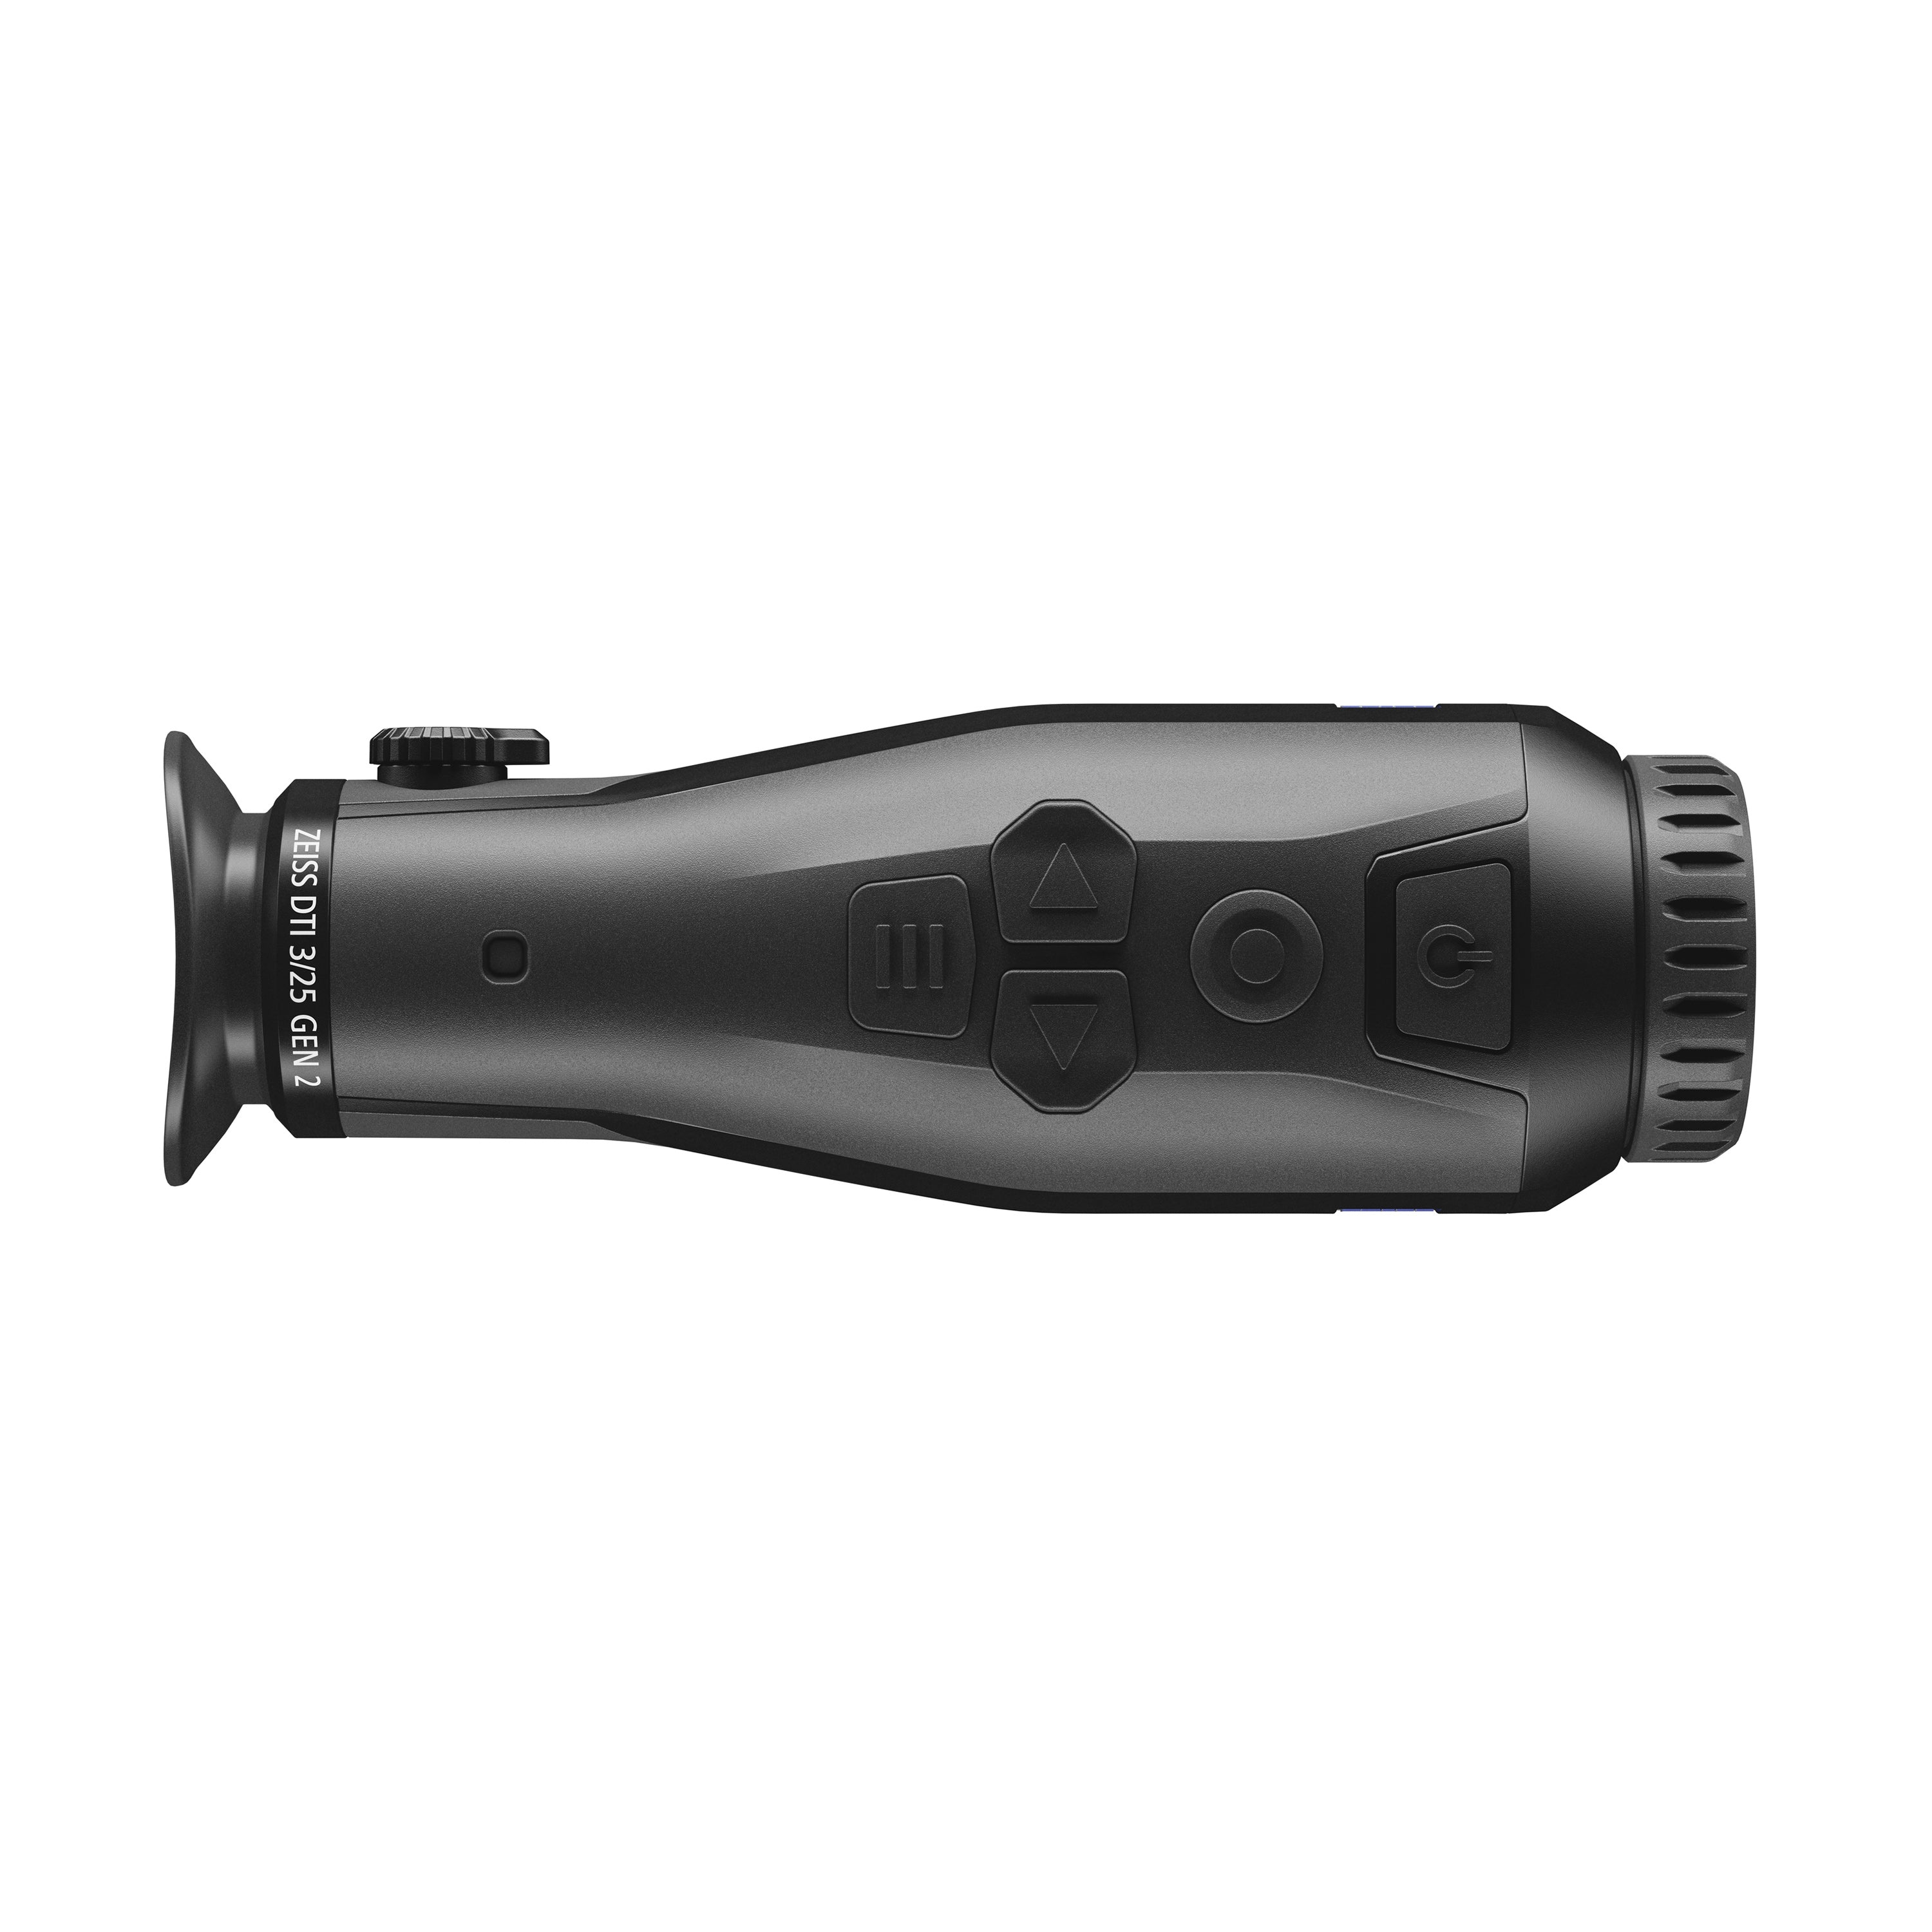 Zeiss DTI 3 Gen 2 Thermal Imaging Camera High-Resolution Monocular for Hunting and Wildlife Observation